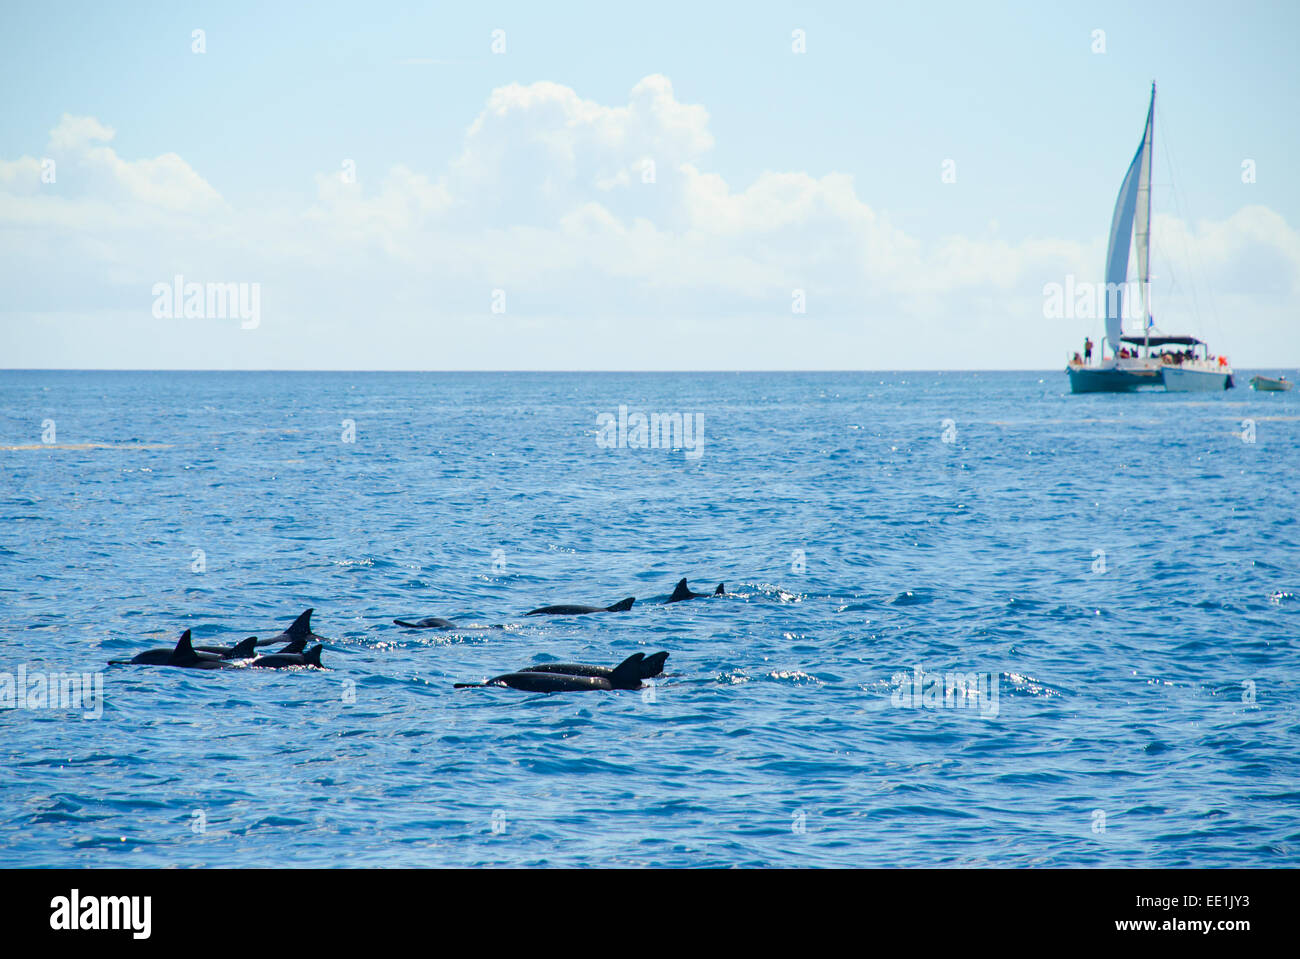 Spinner Dolphins in Tamarin Bay, Mauritius Stock Photo